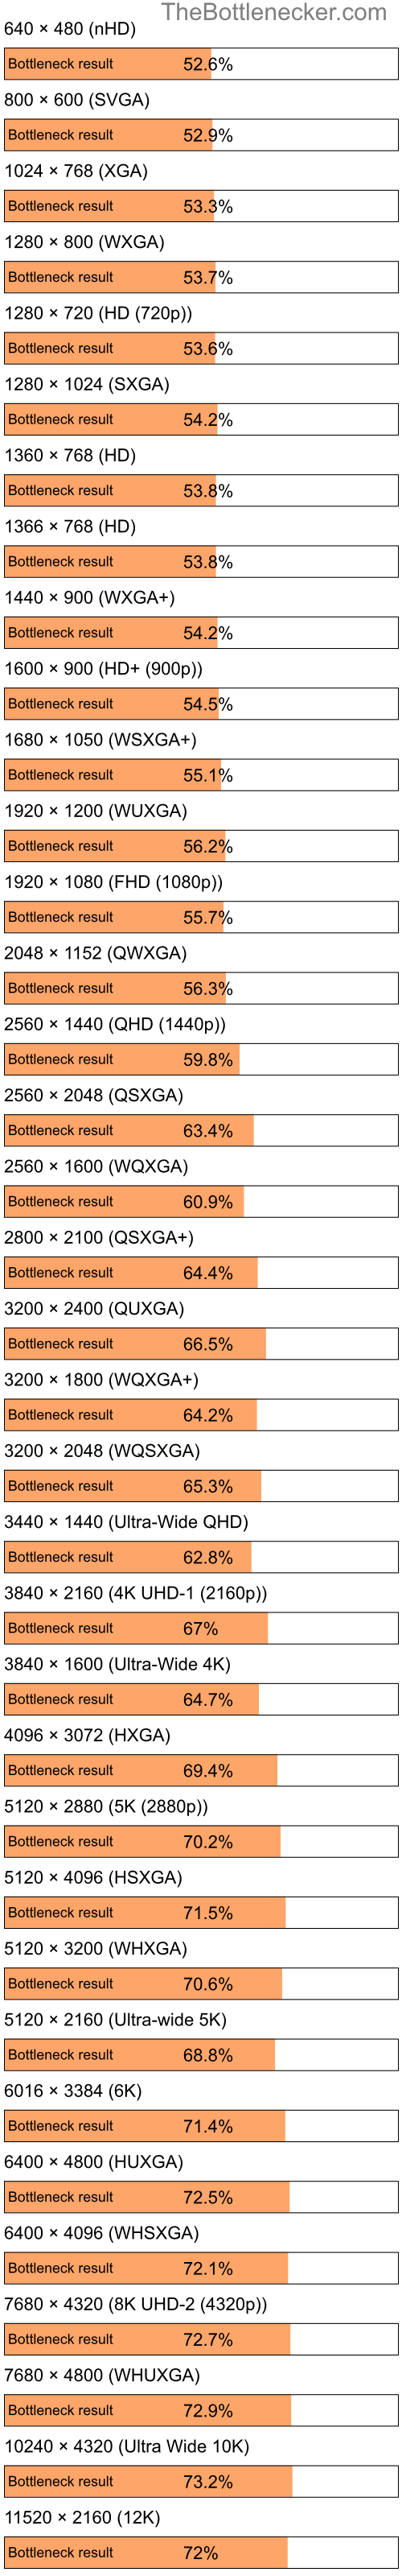 Bottleneck results by resolution for Intel Pentium 4 and AMD Mobility Radeon HD 2400 XT in Processor Intense Tasks